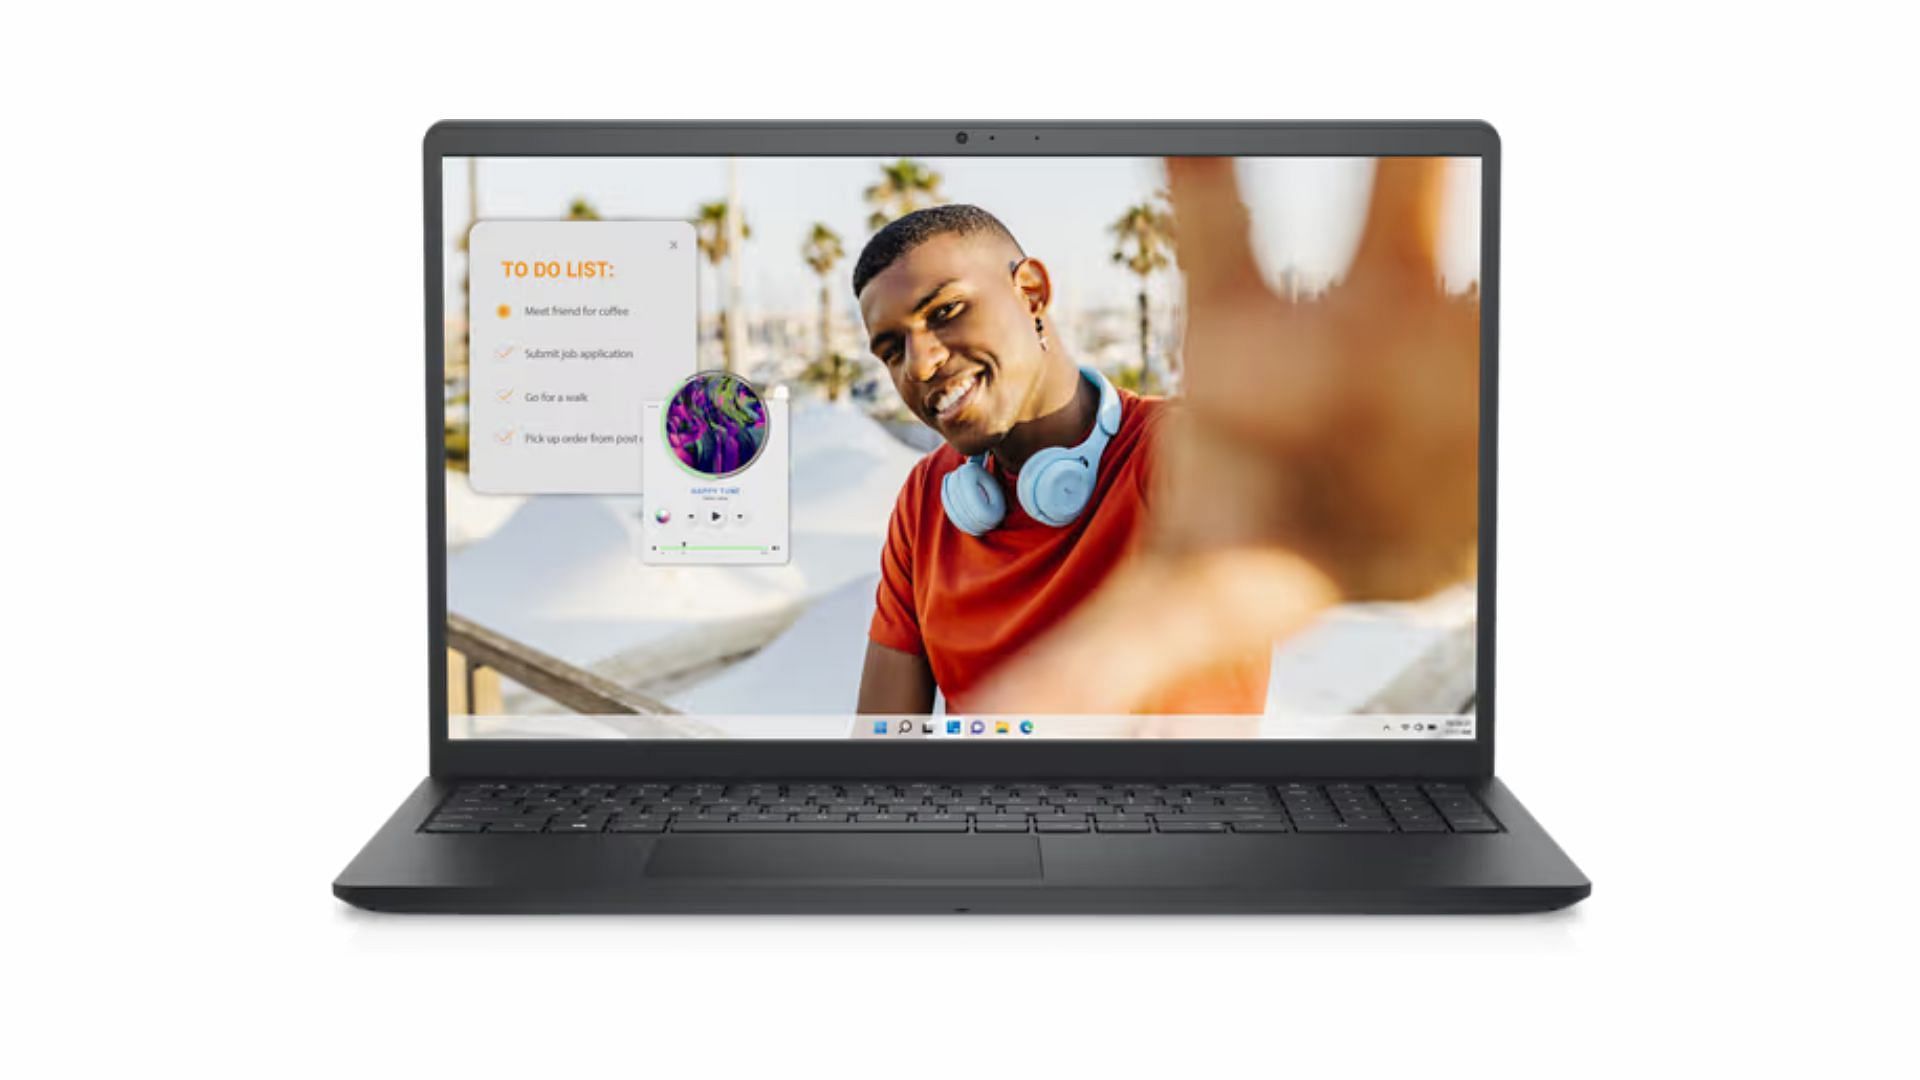 Dell Inspiron 15 is a solid budget AMD laptop (Image via Dell)